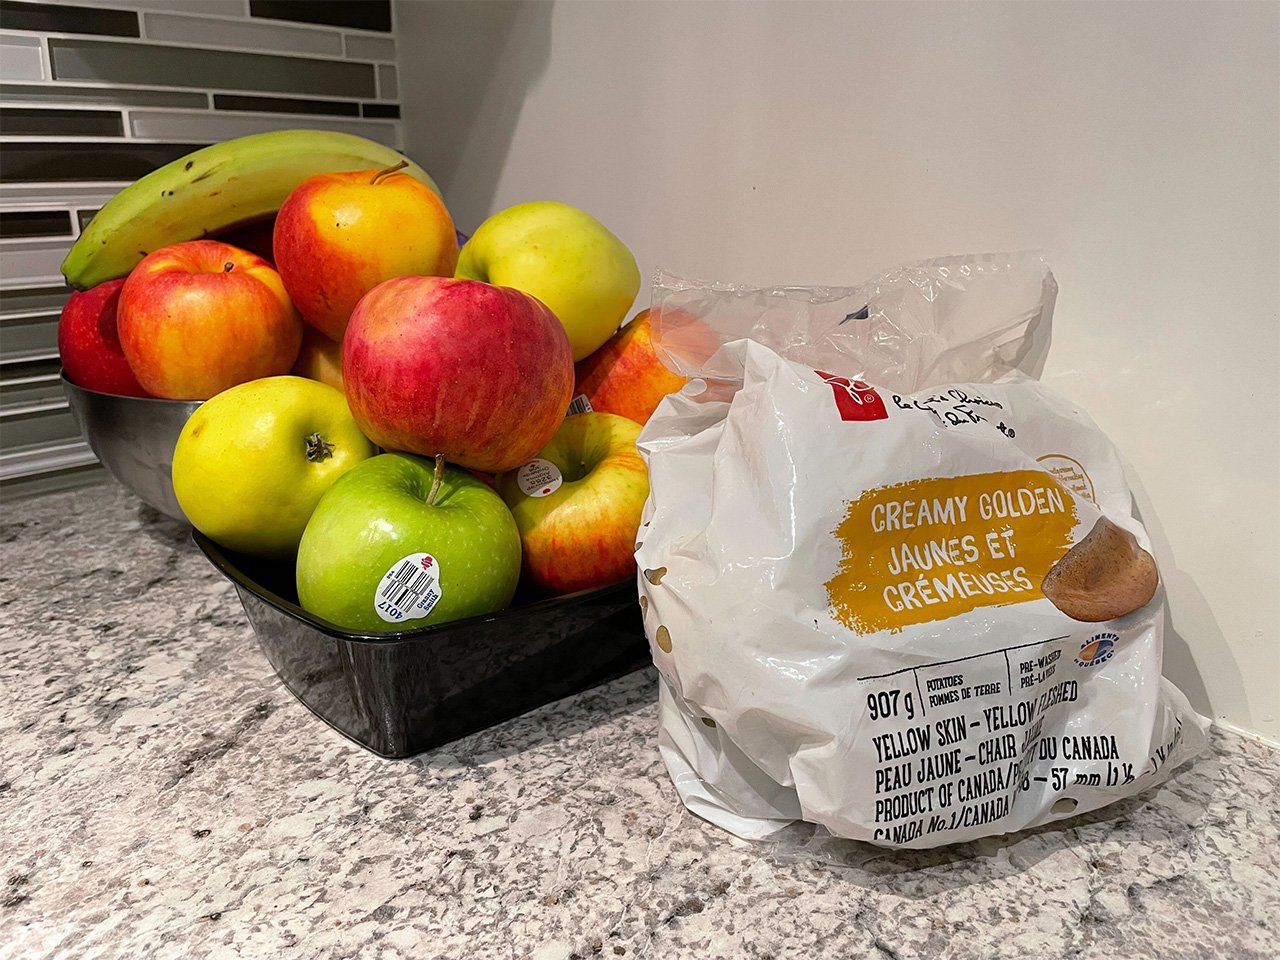 Apples, a banana and a package of potatoes from Loblaws